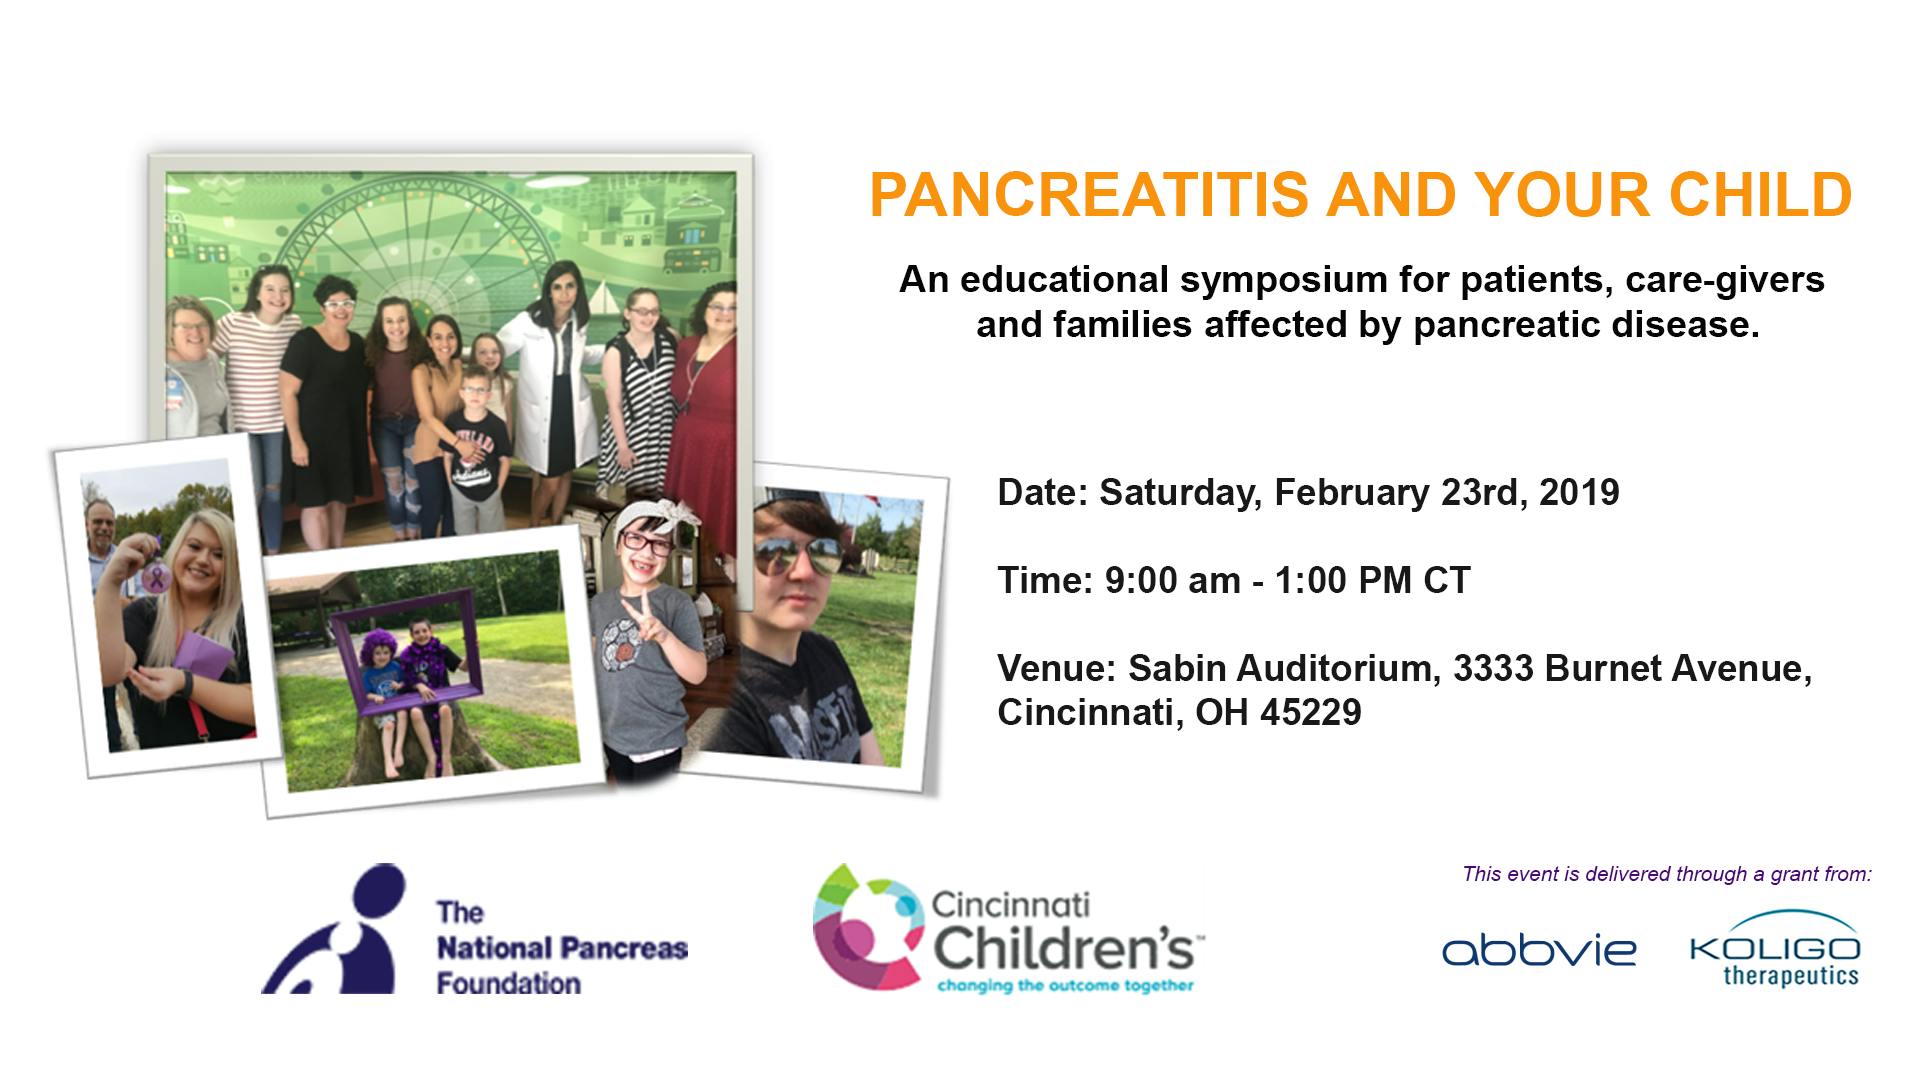 PANCREATITIS AND YOUR CHILD: An educational symposium for patients, care-givers and families affected by pancreatic disease.